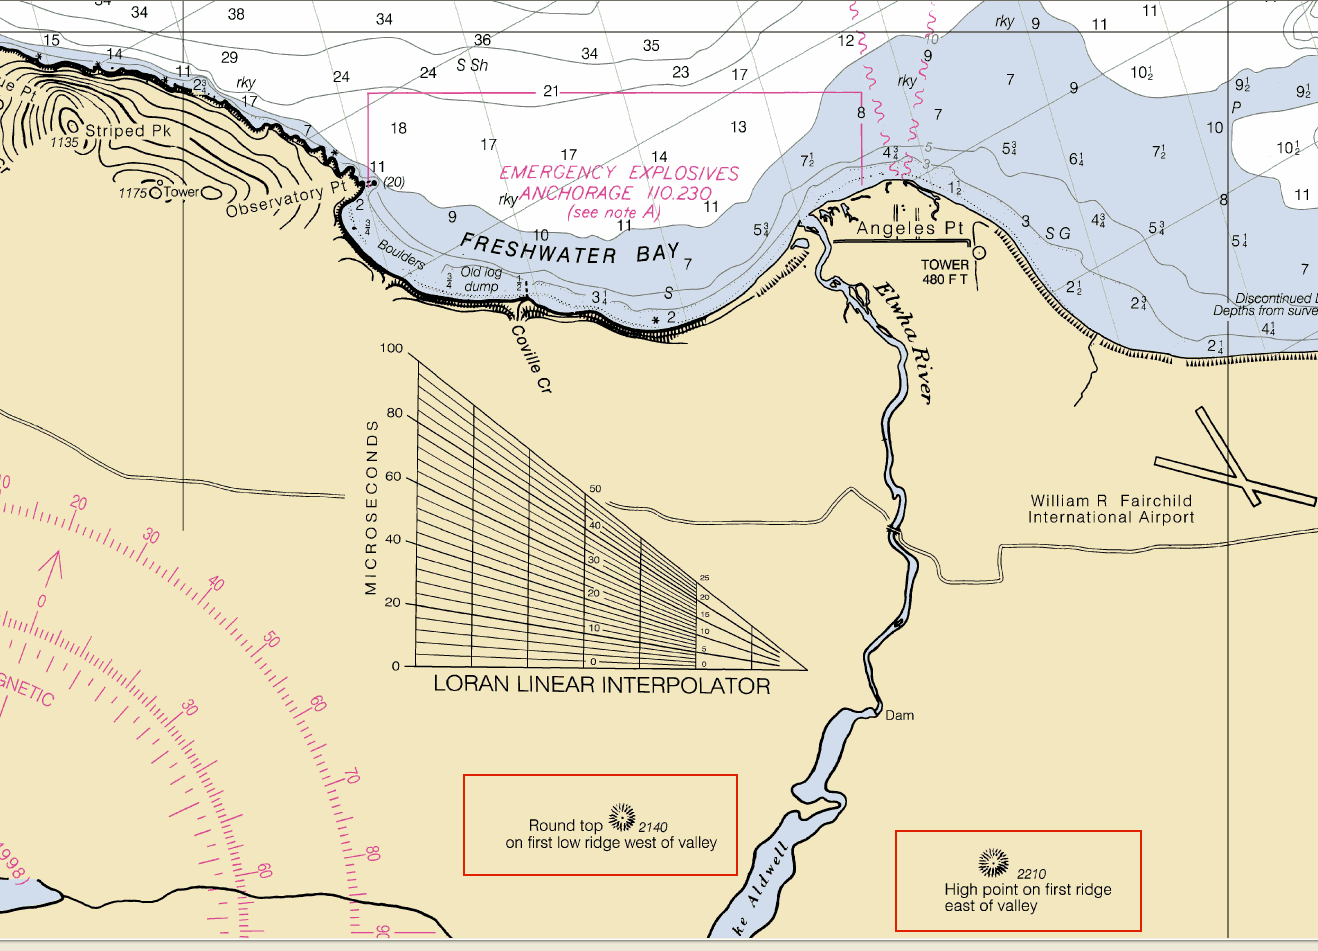 Types Of Nautical Charts And Their Uses